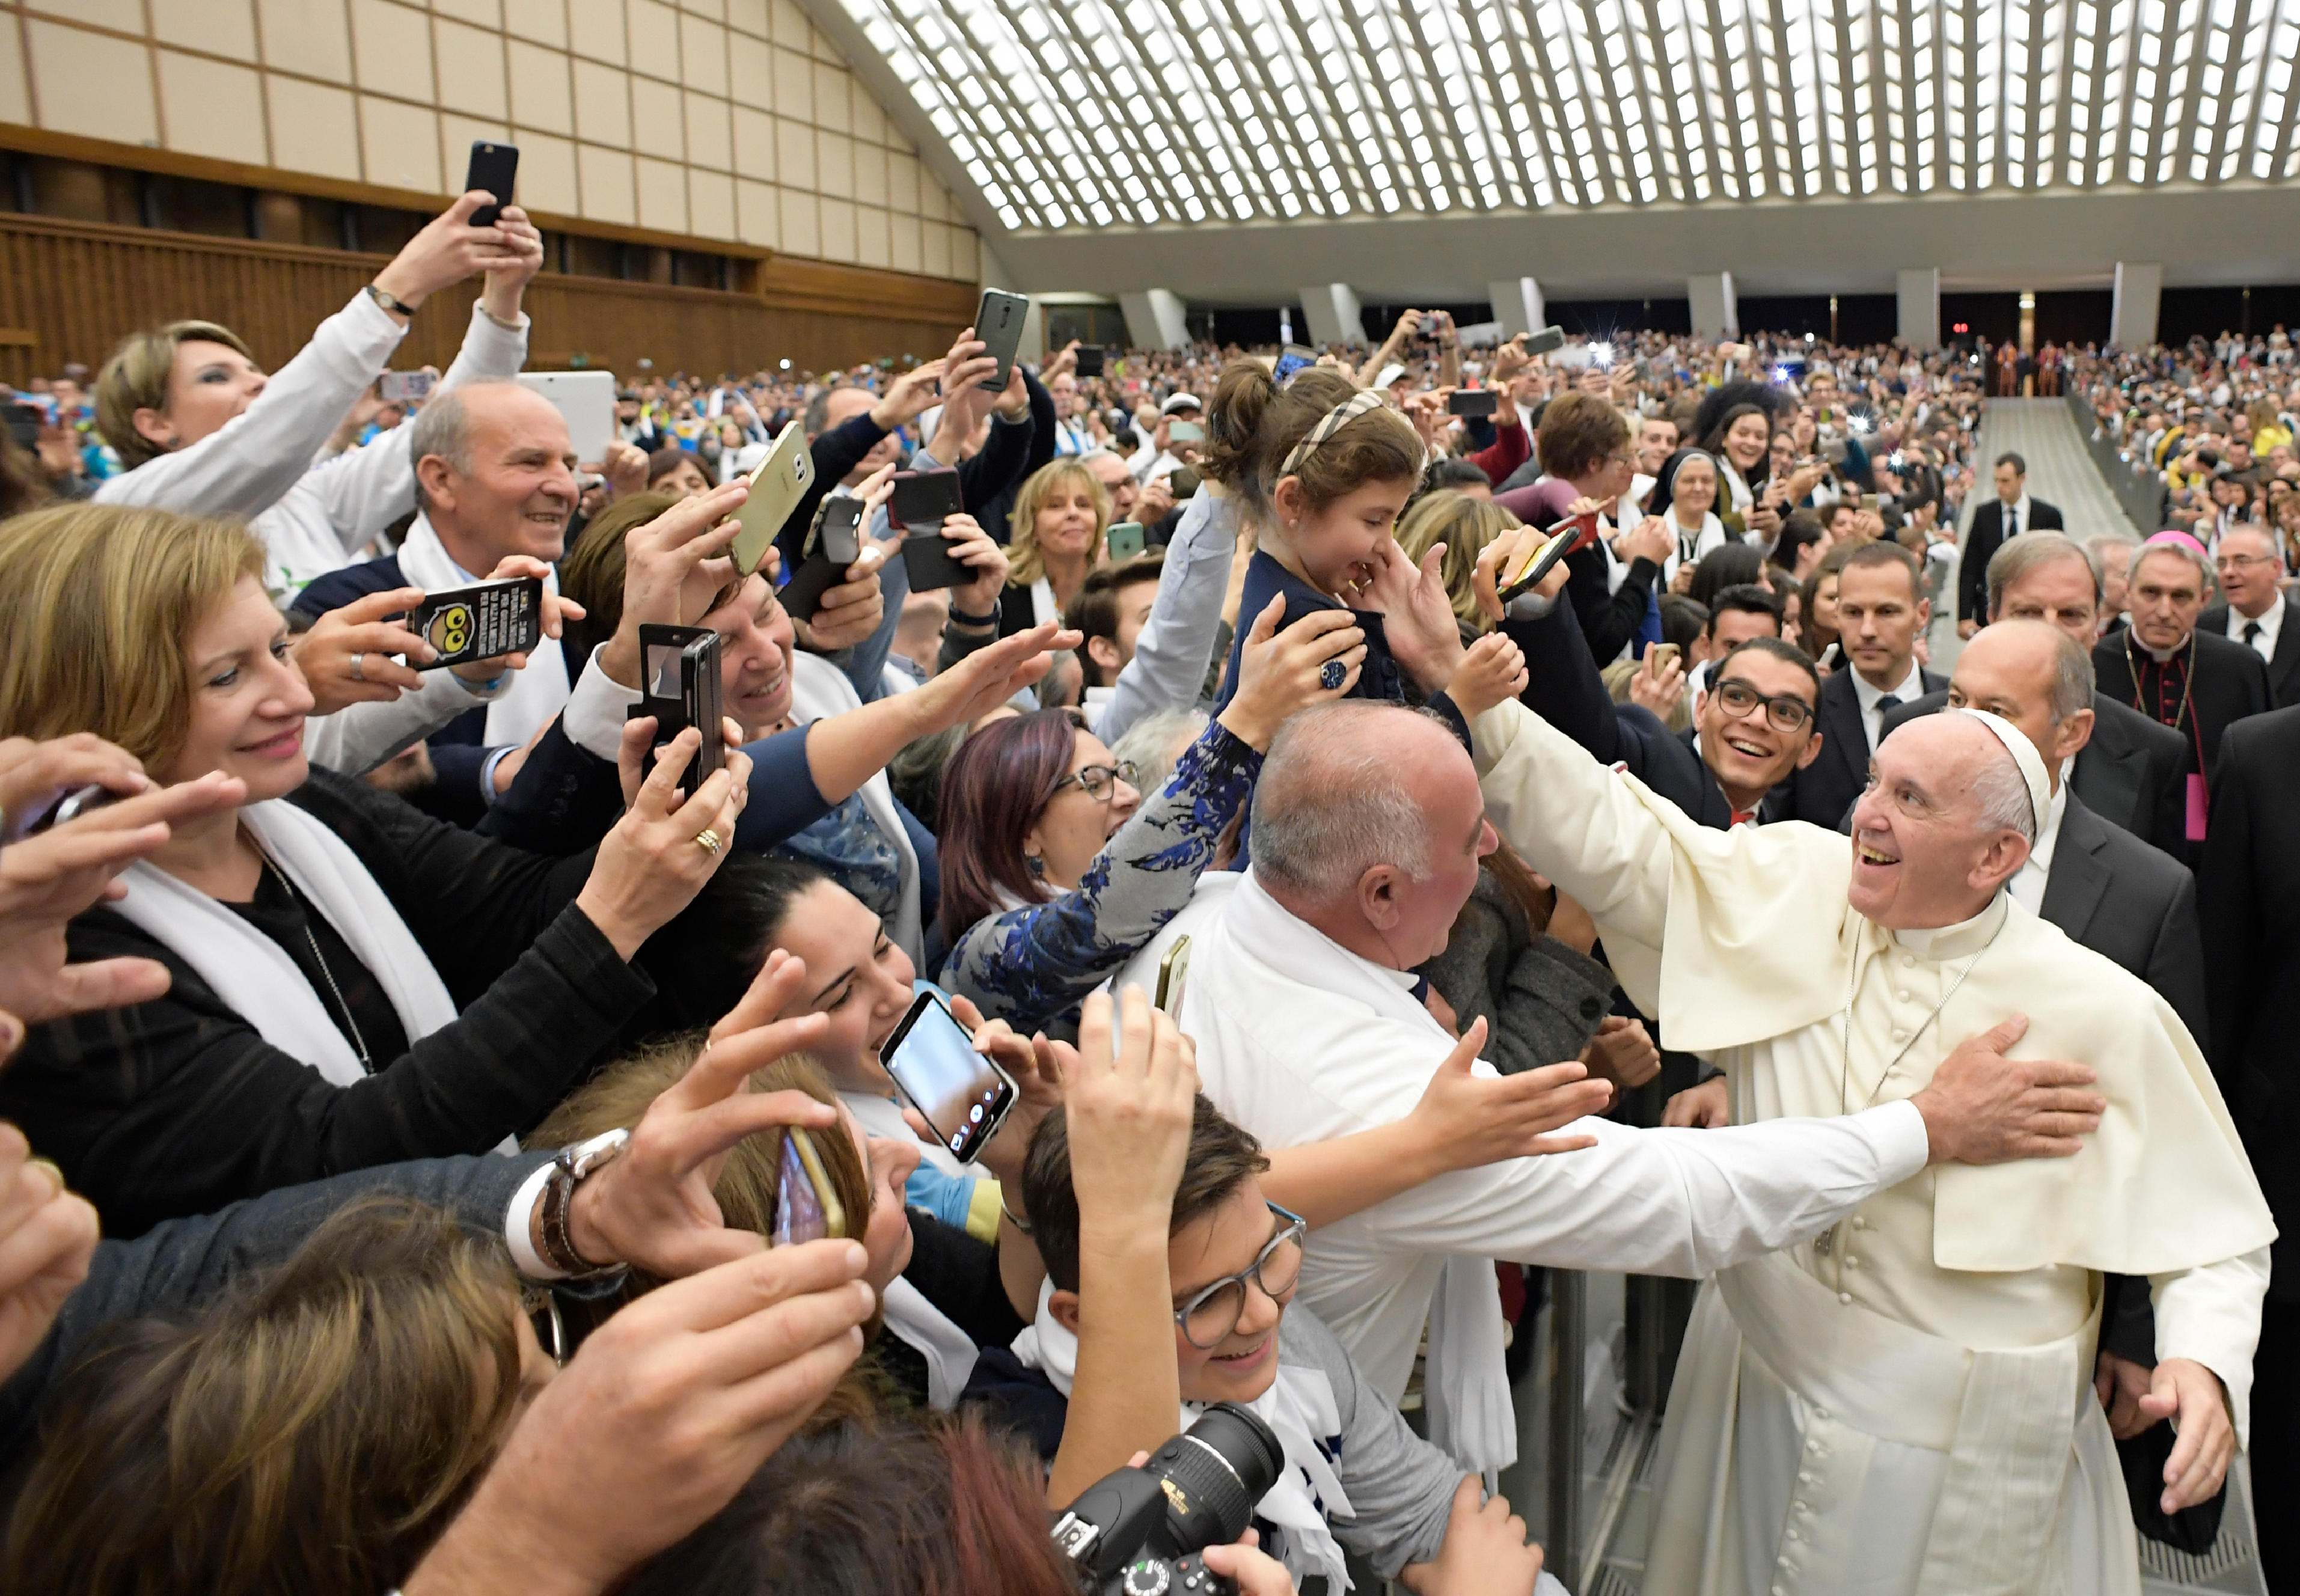 Pope Francis greets the crowd during an audience with young volunteers, government officials and organizations involved in Italy's national civil service programs, in Paul VI Hall at the Vatican Nov. 26. (CNS photo/L'Osservatore Romano, handout) See POPE-VOLUNTEERS Nov. 28, 2106.